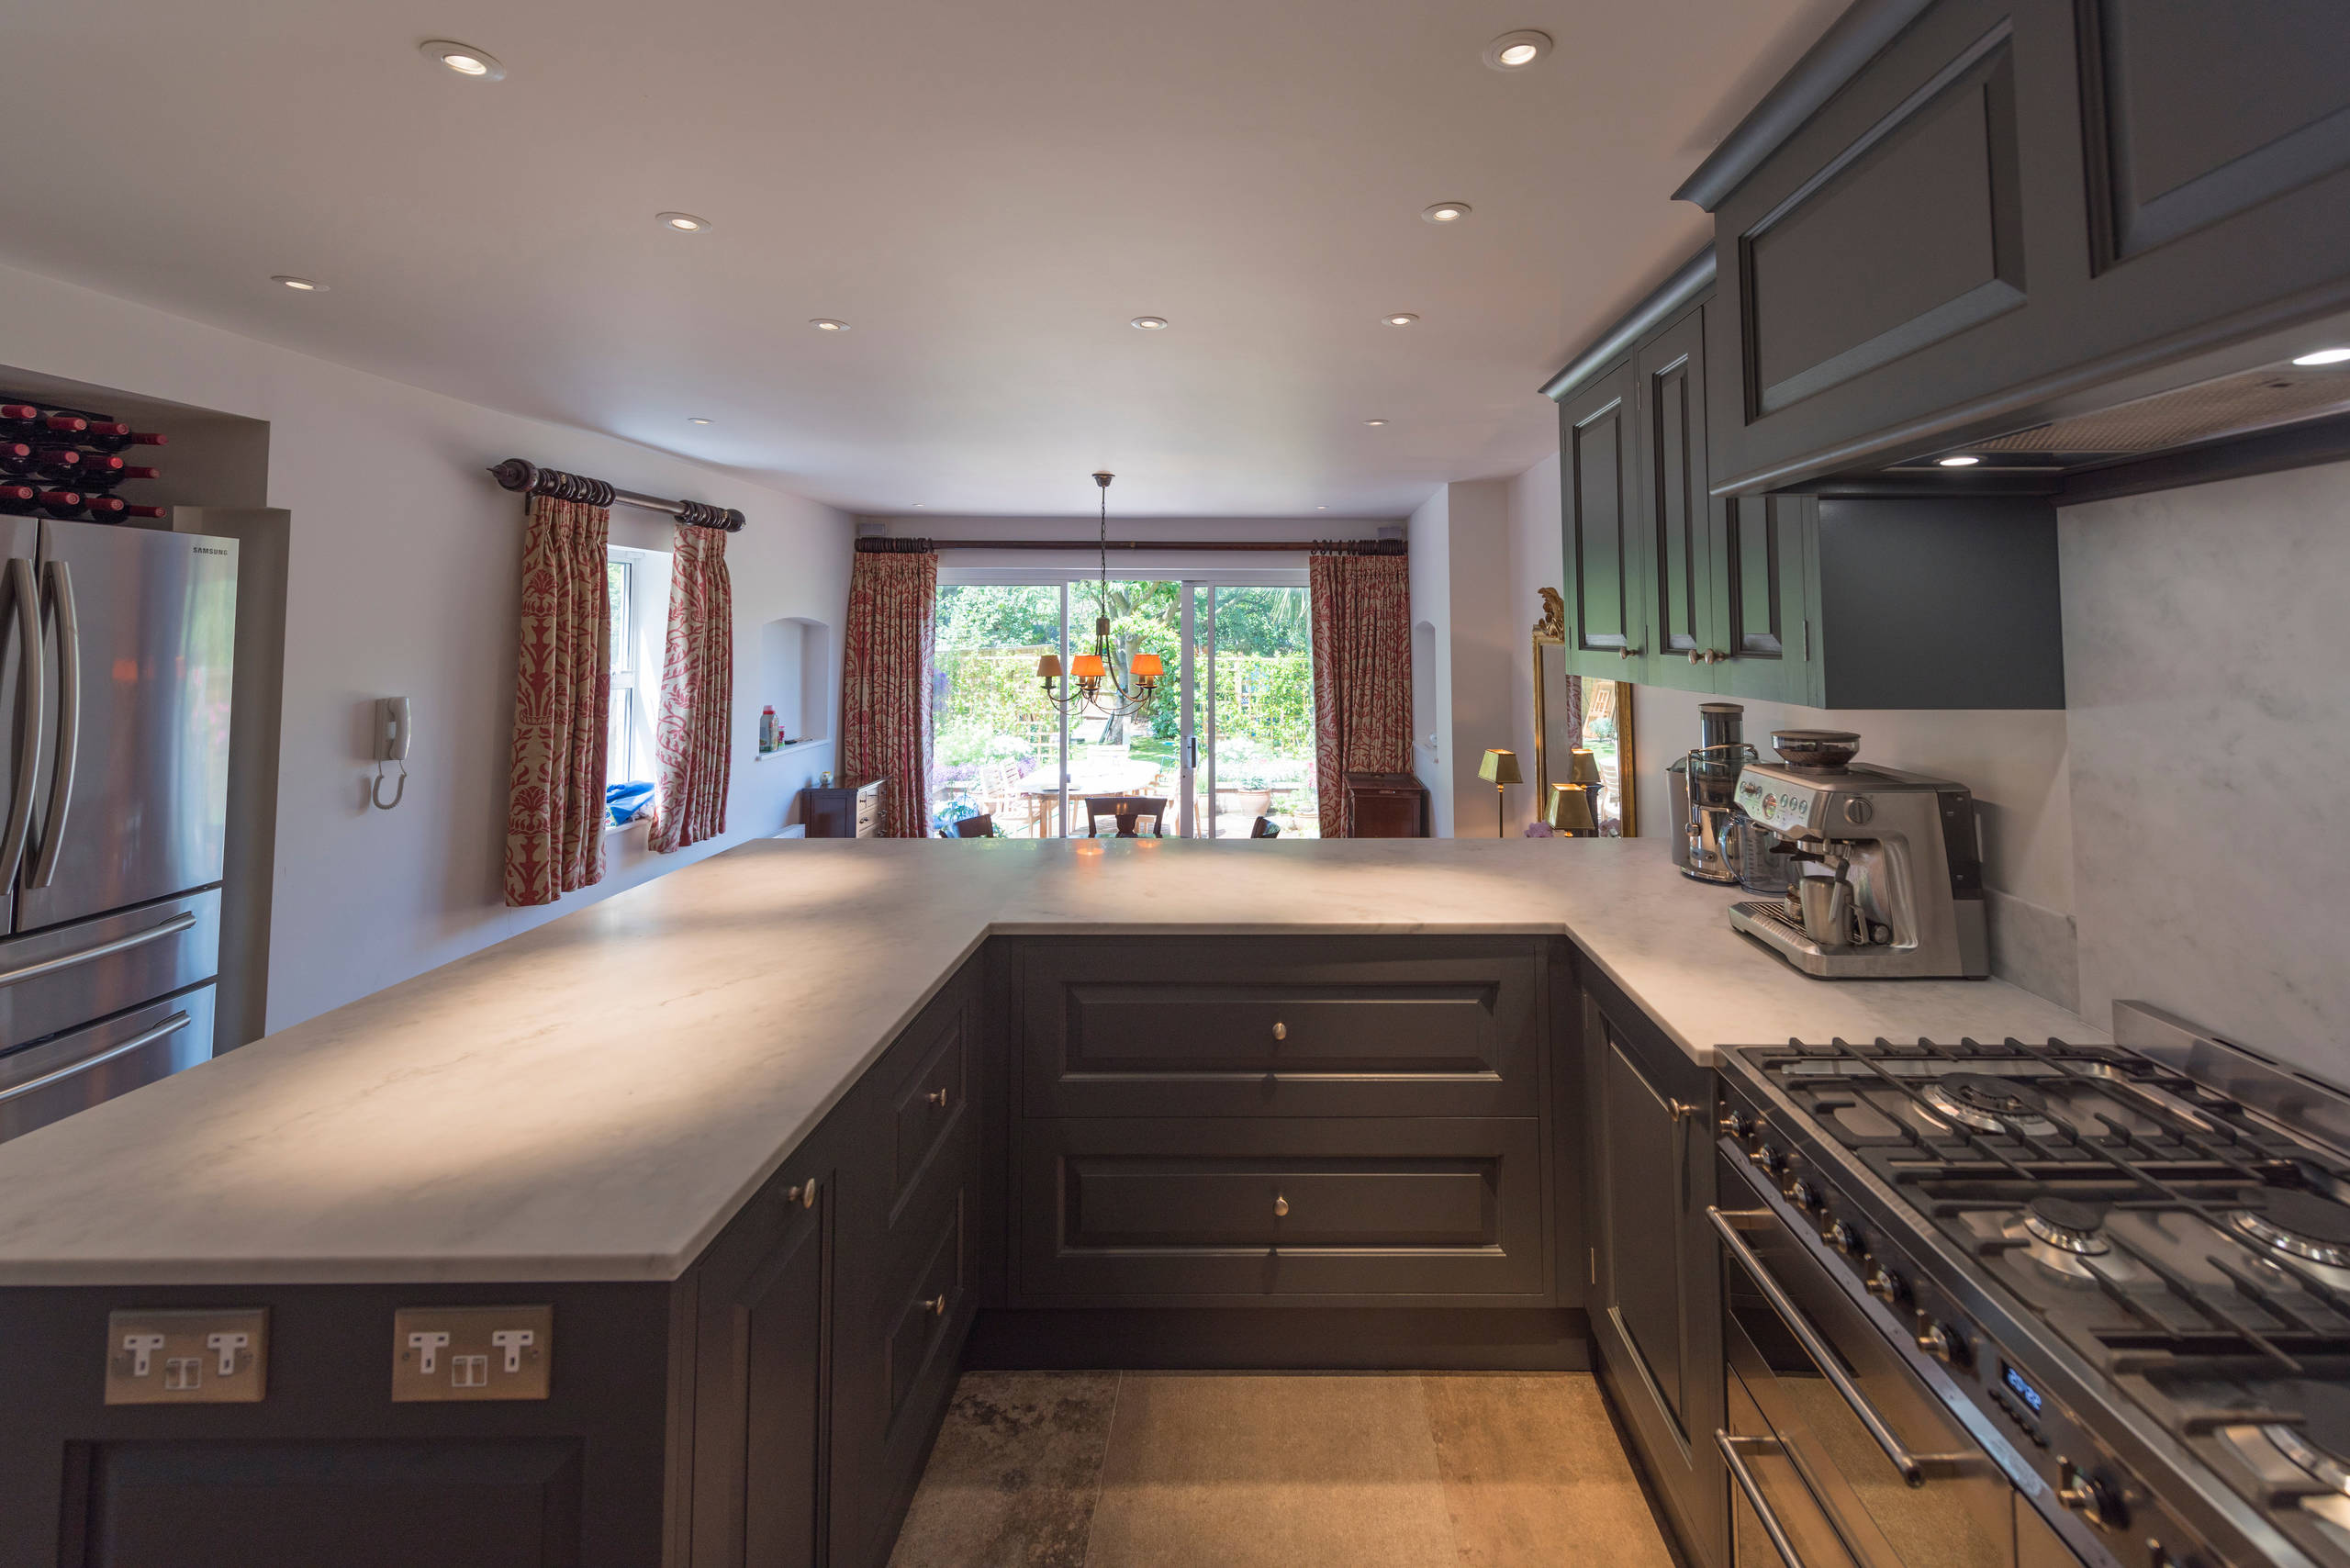 Grey Painted Balham Kitchen, with one side in Cherry